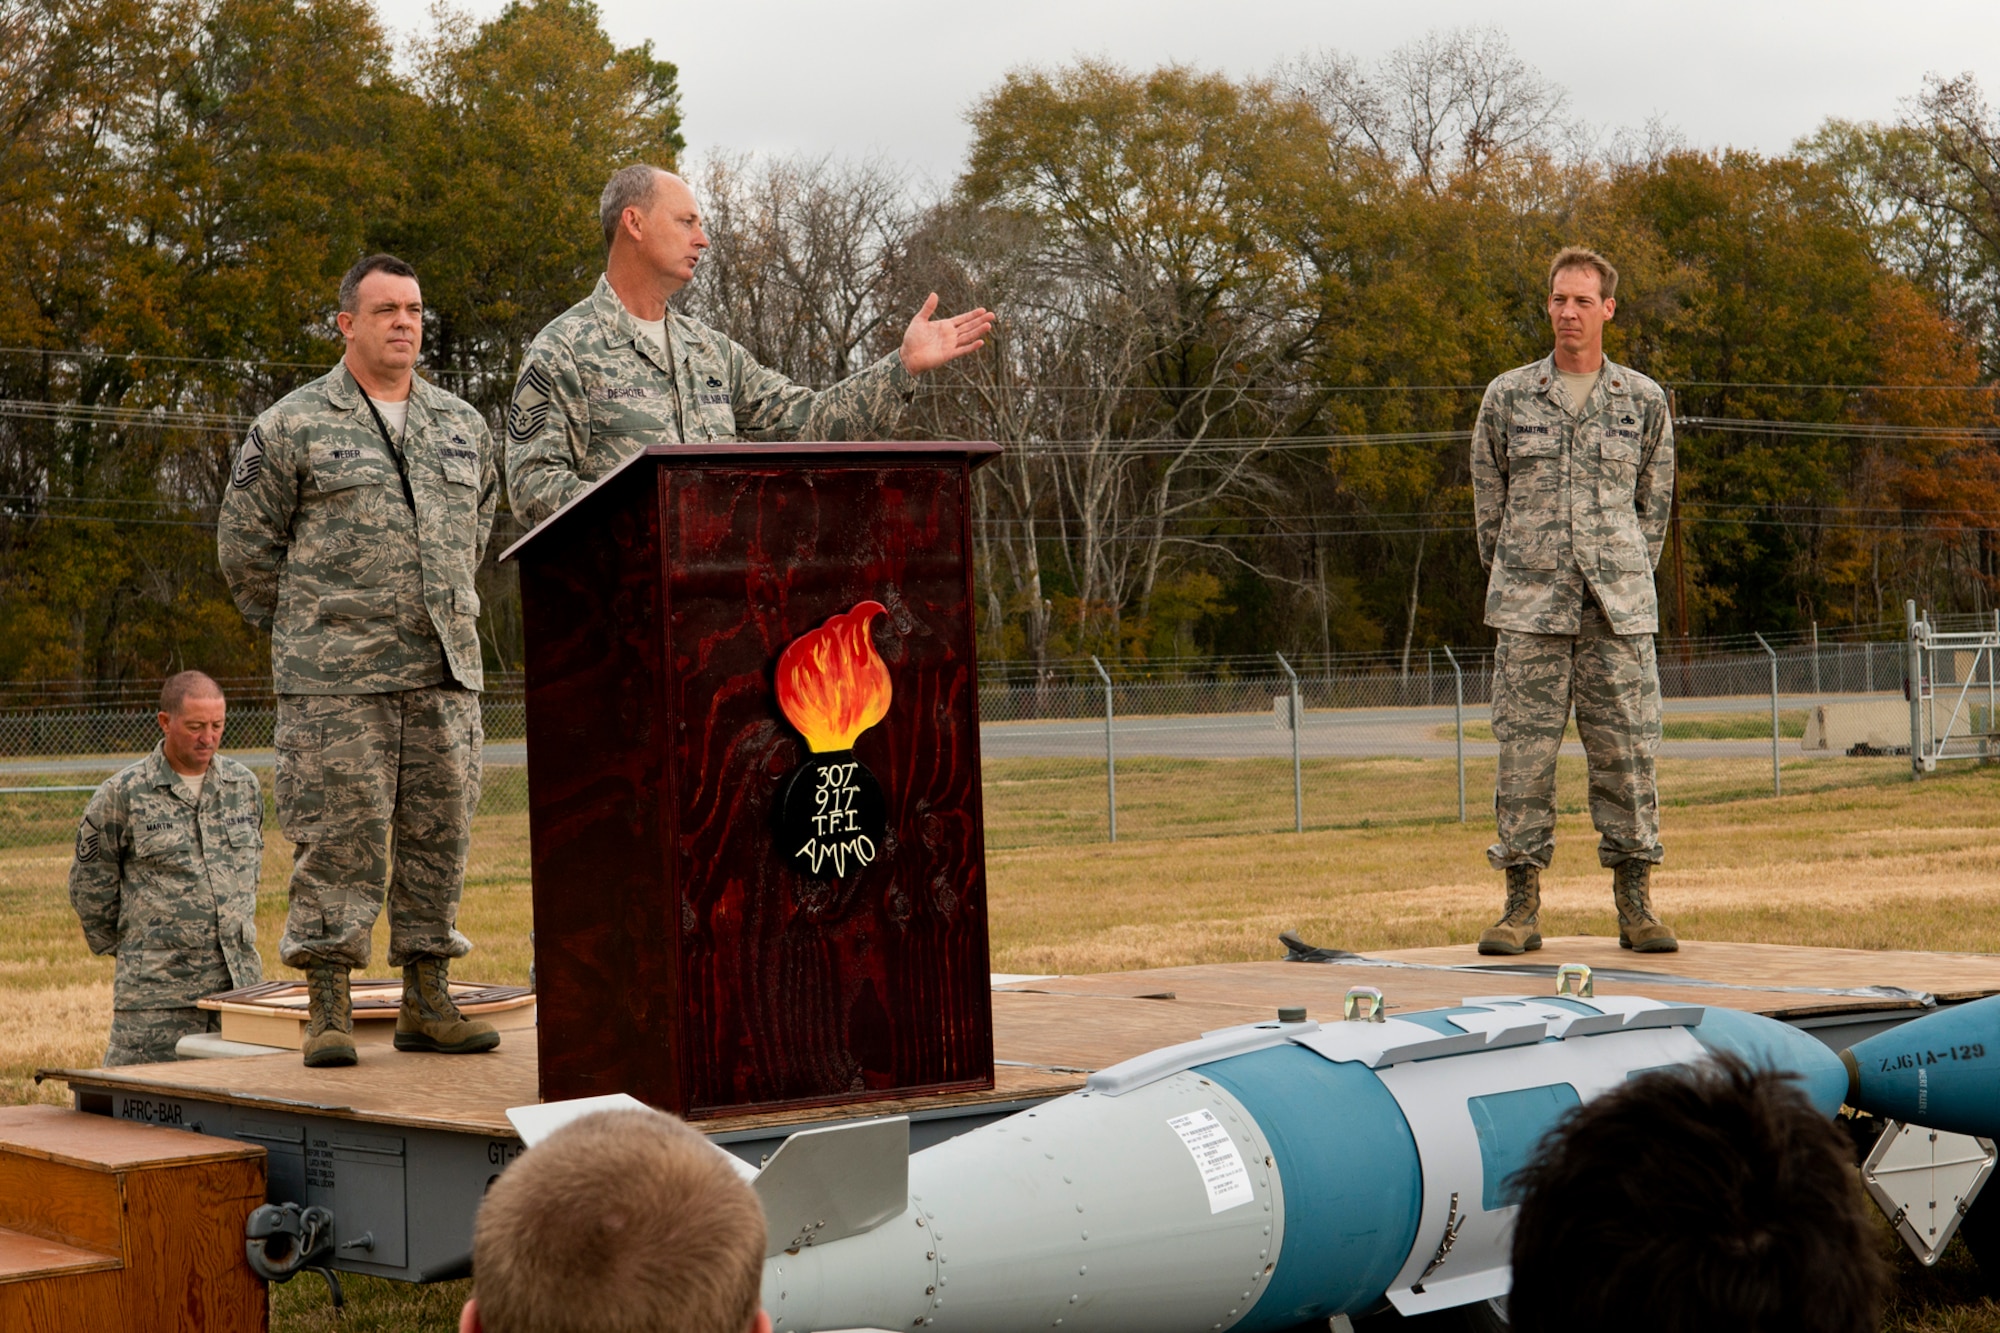 U.S. Air Force Chief Master Sgt. Bobby Deshotel, 307th Maintenance Squadron munitions flight chief, speaks during his retirement ceremony, Dec. 2, 2012, Barksdale Air Force Base, La. Deshotel is retiring after serving over 24 years in the Air Force. (U.S. Air Force photo by Master Sgt. Greg Steele/Released)